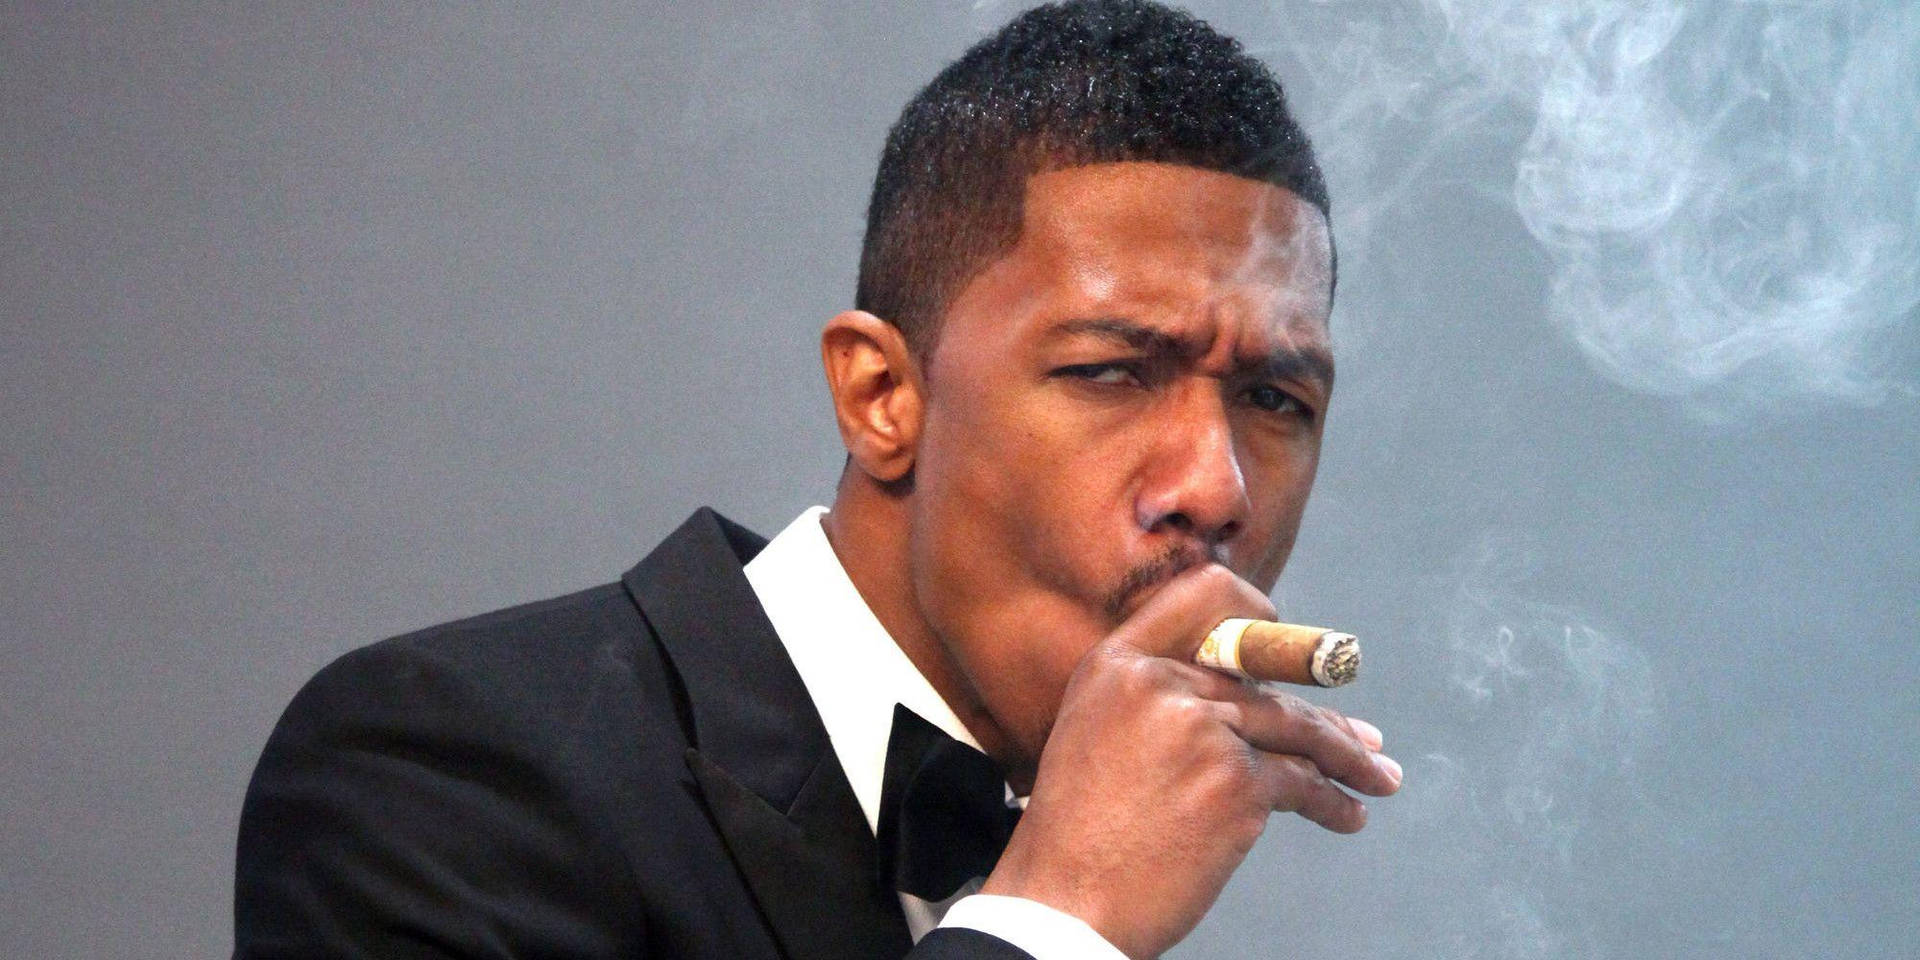 Nick Cannon With Cigar